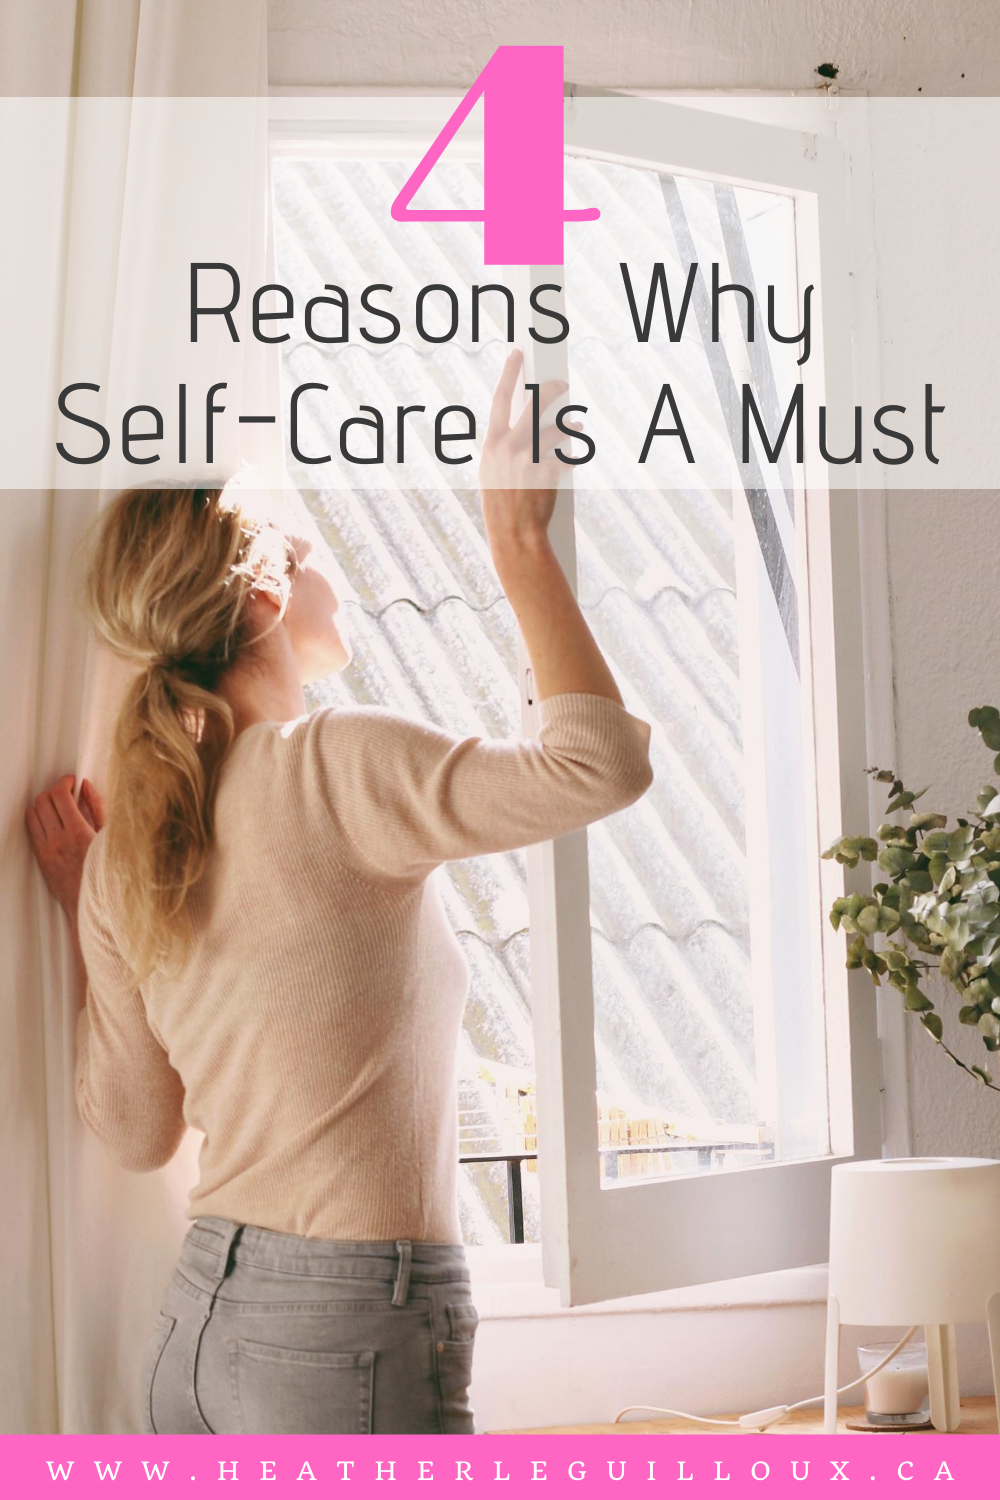 Self-care is a topic often spoken of, yet there seems not to be a clear understanding of what it actually entails. Self-care considers all factors that impact your positive well-being, either physically or psychologically or the combination of the two. Self-care can be very helpful for living a positive and productive life, and here are some excellent reasons why it should be a priority for everyone. #selfcare #positive #wellbeing #mood #selfesteem